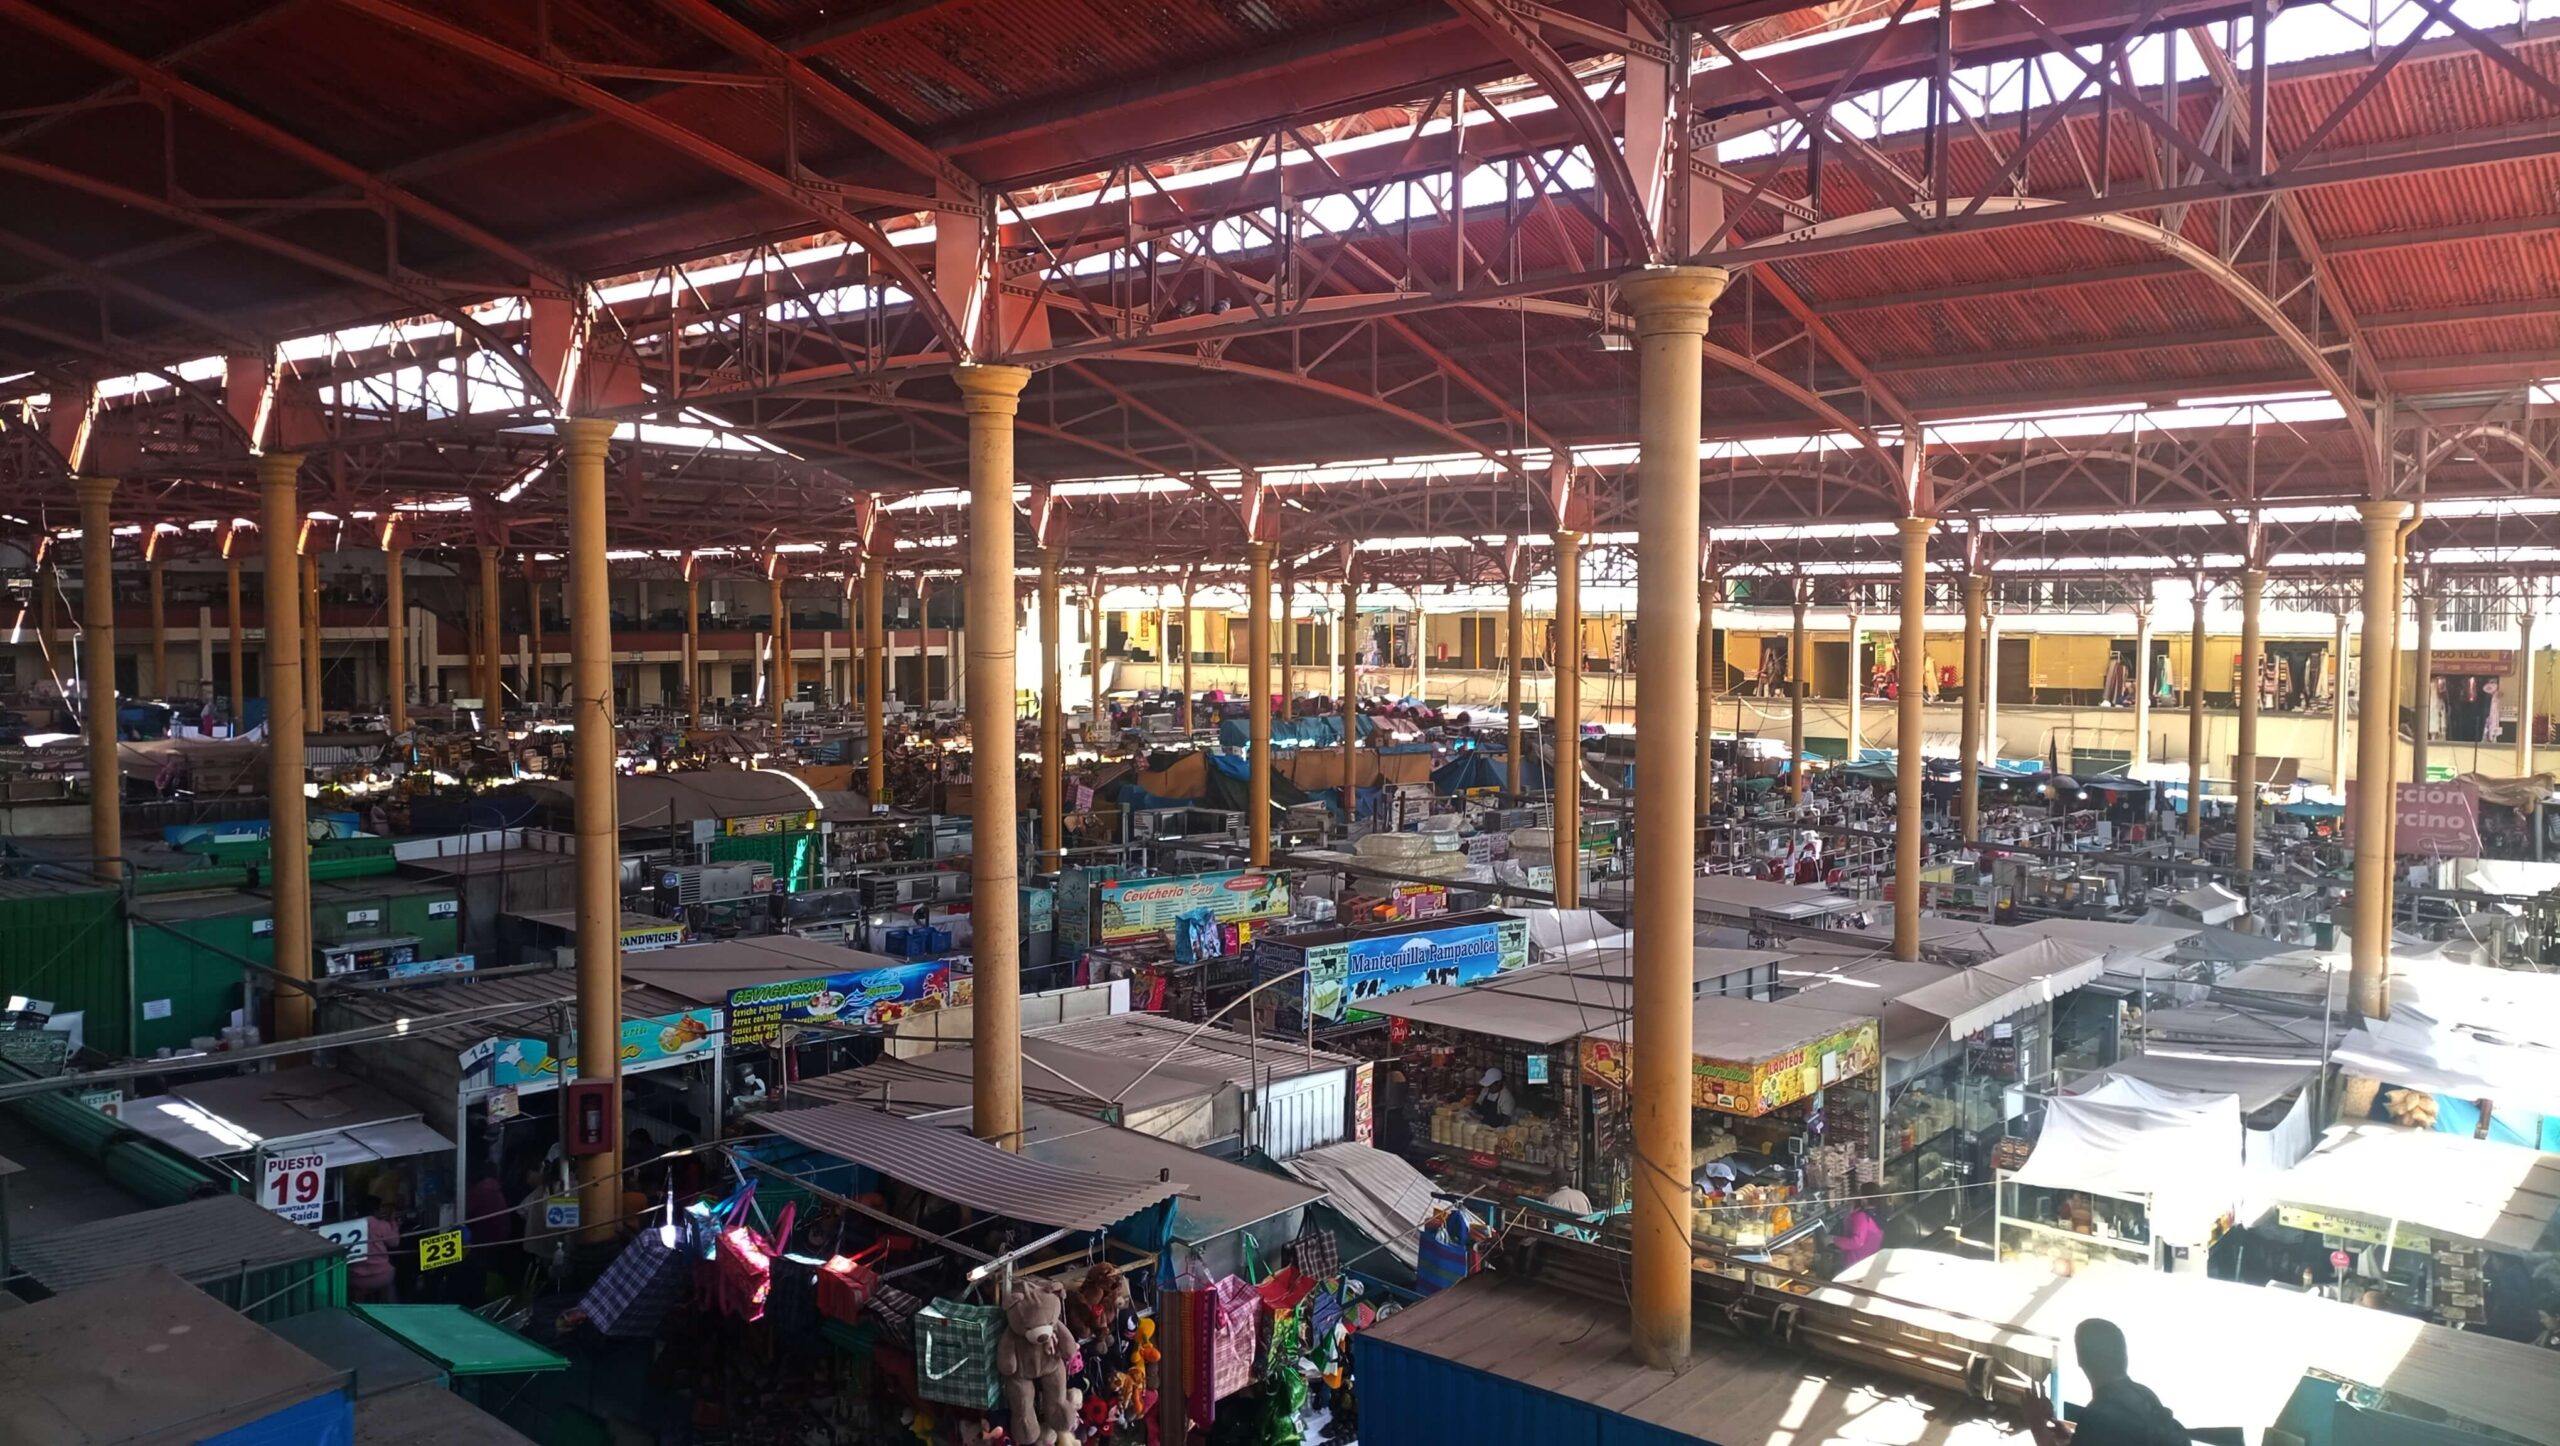 View from above of the market